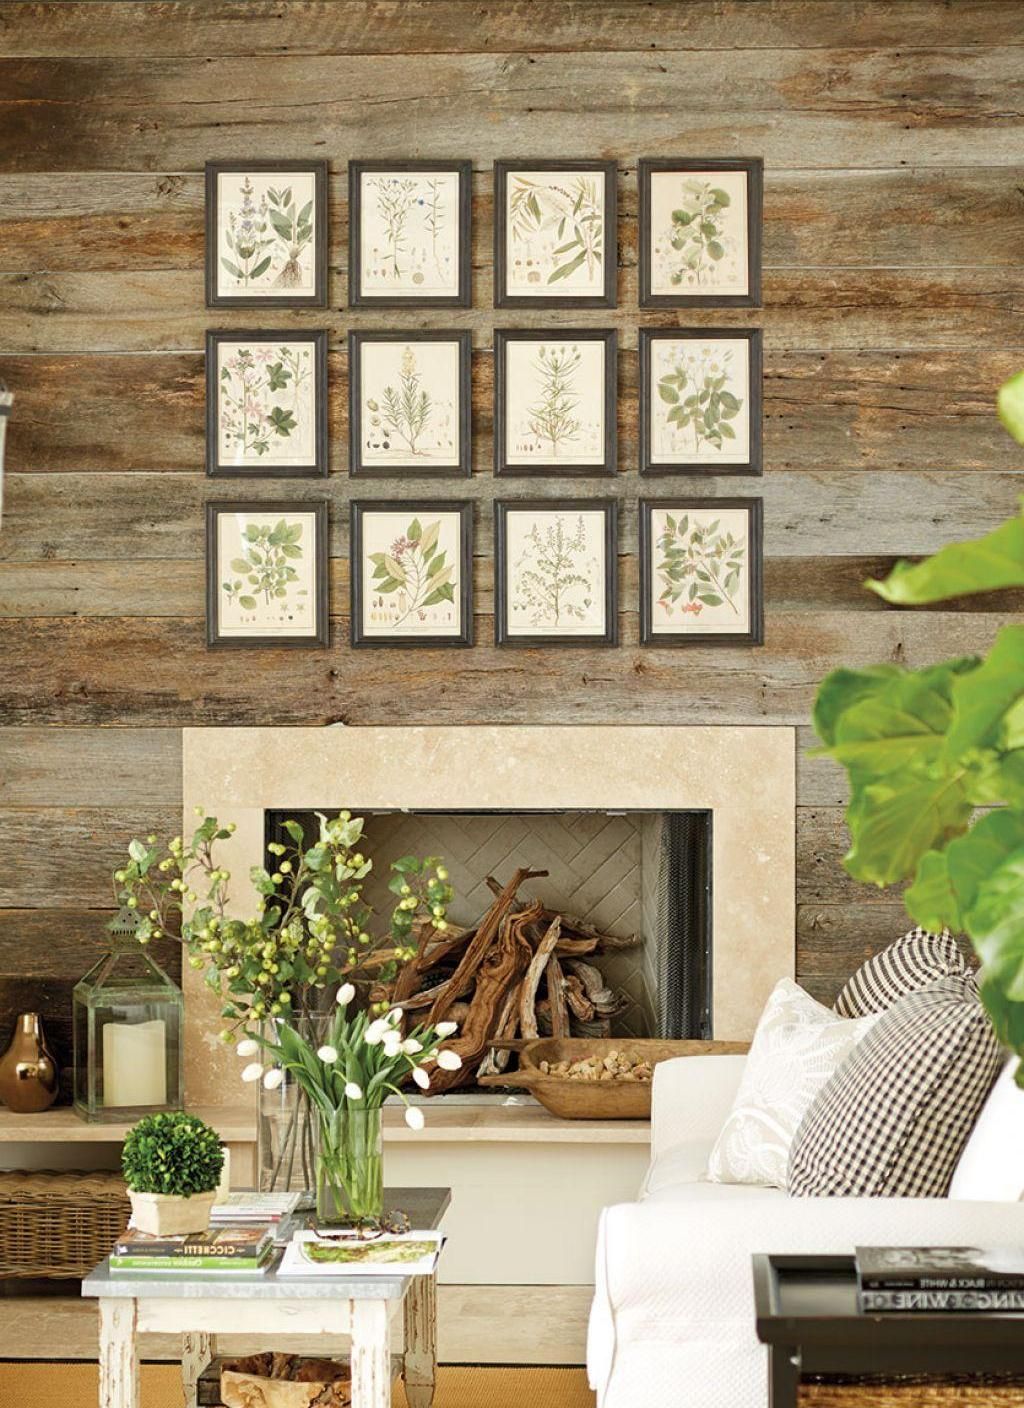 Hanging Art Over The Fireplace